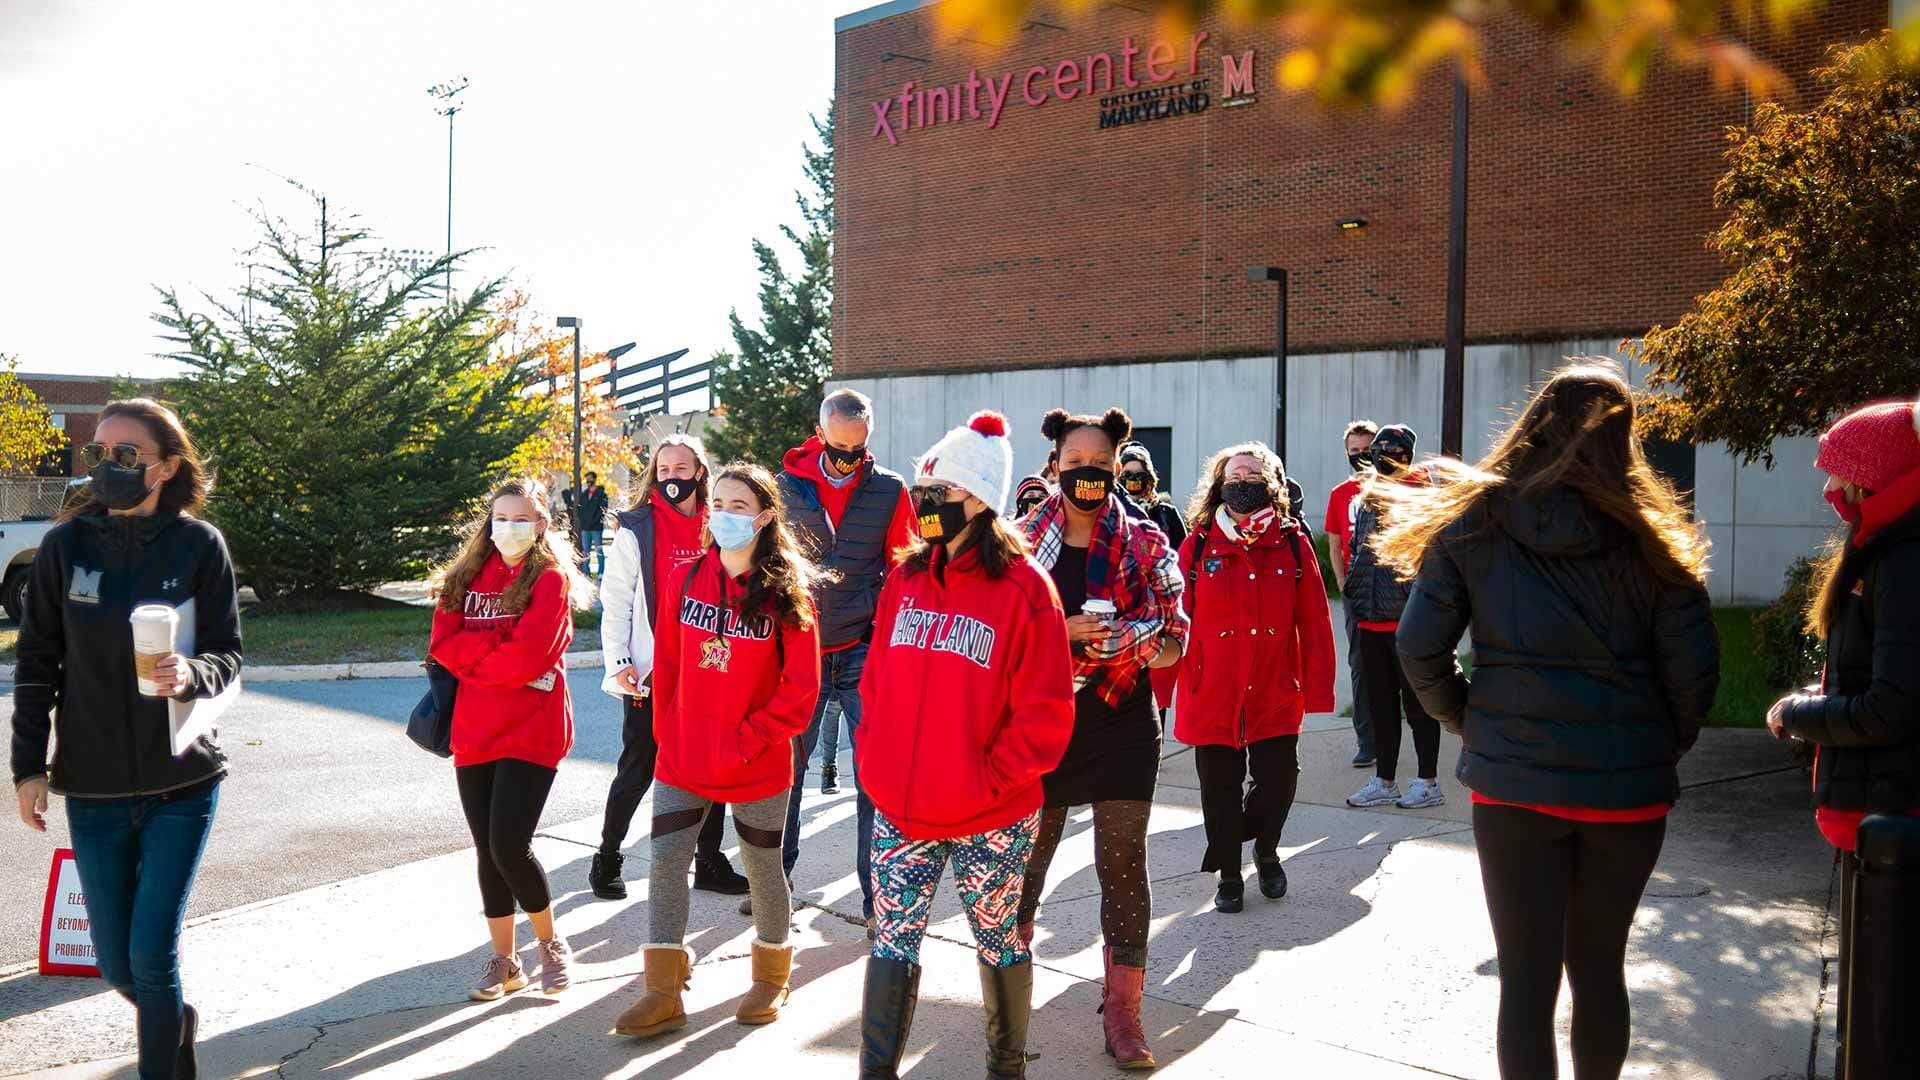 UMD students volunteer to help with voting at the Xfinity Center in the November 2020 presidential election.